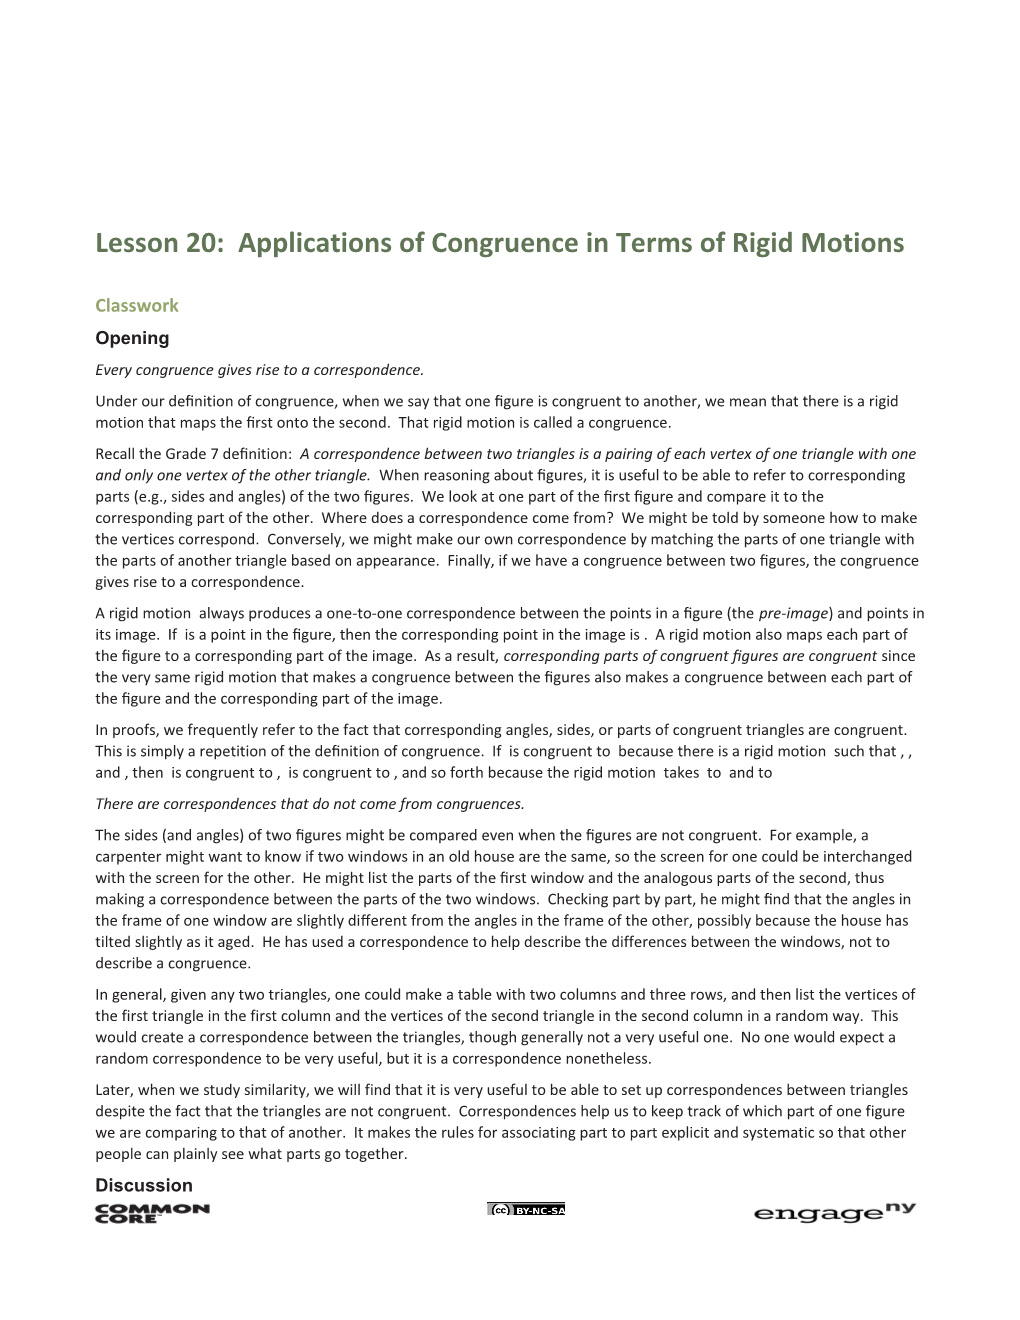 Lesson 20: Applications of Congruence in Terms of Rigid Motions